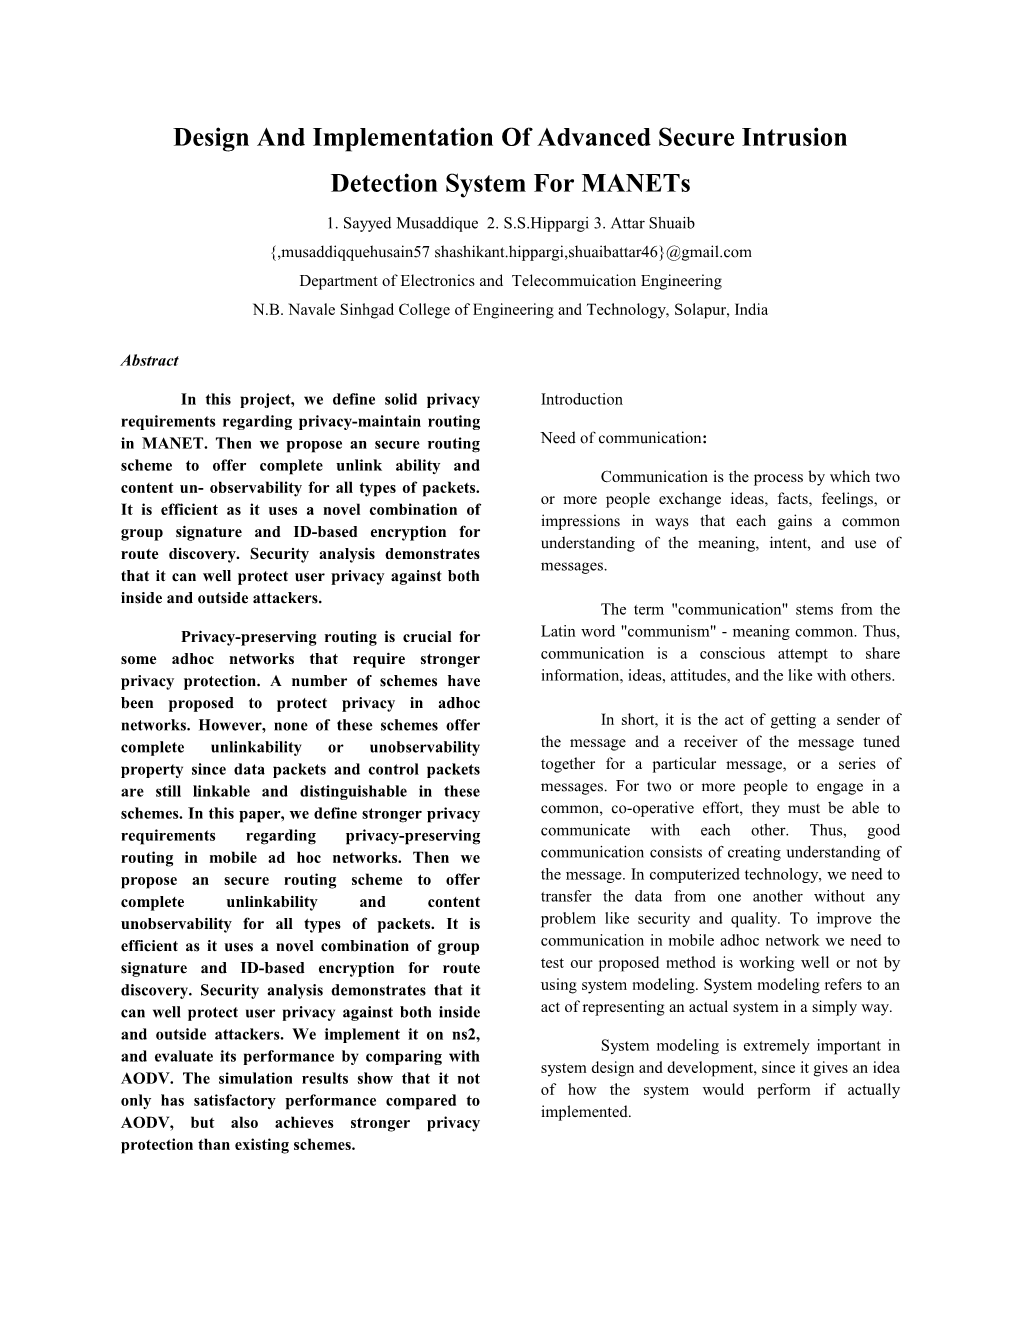 Design and Implementation of Advanced Secure Intrusion Detection System for Manets